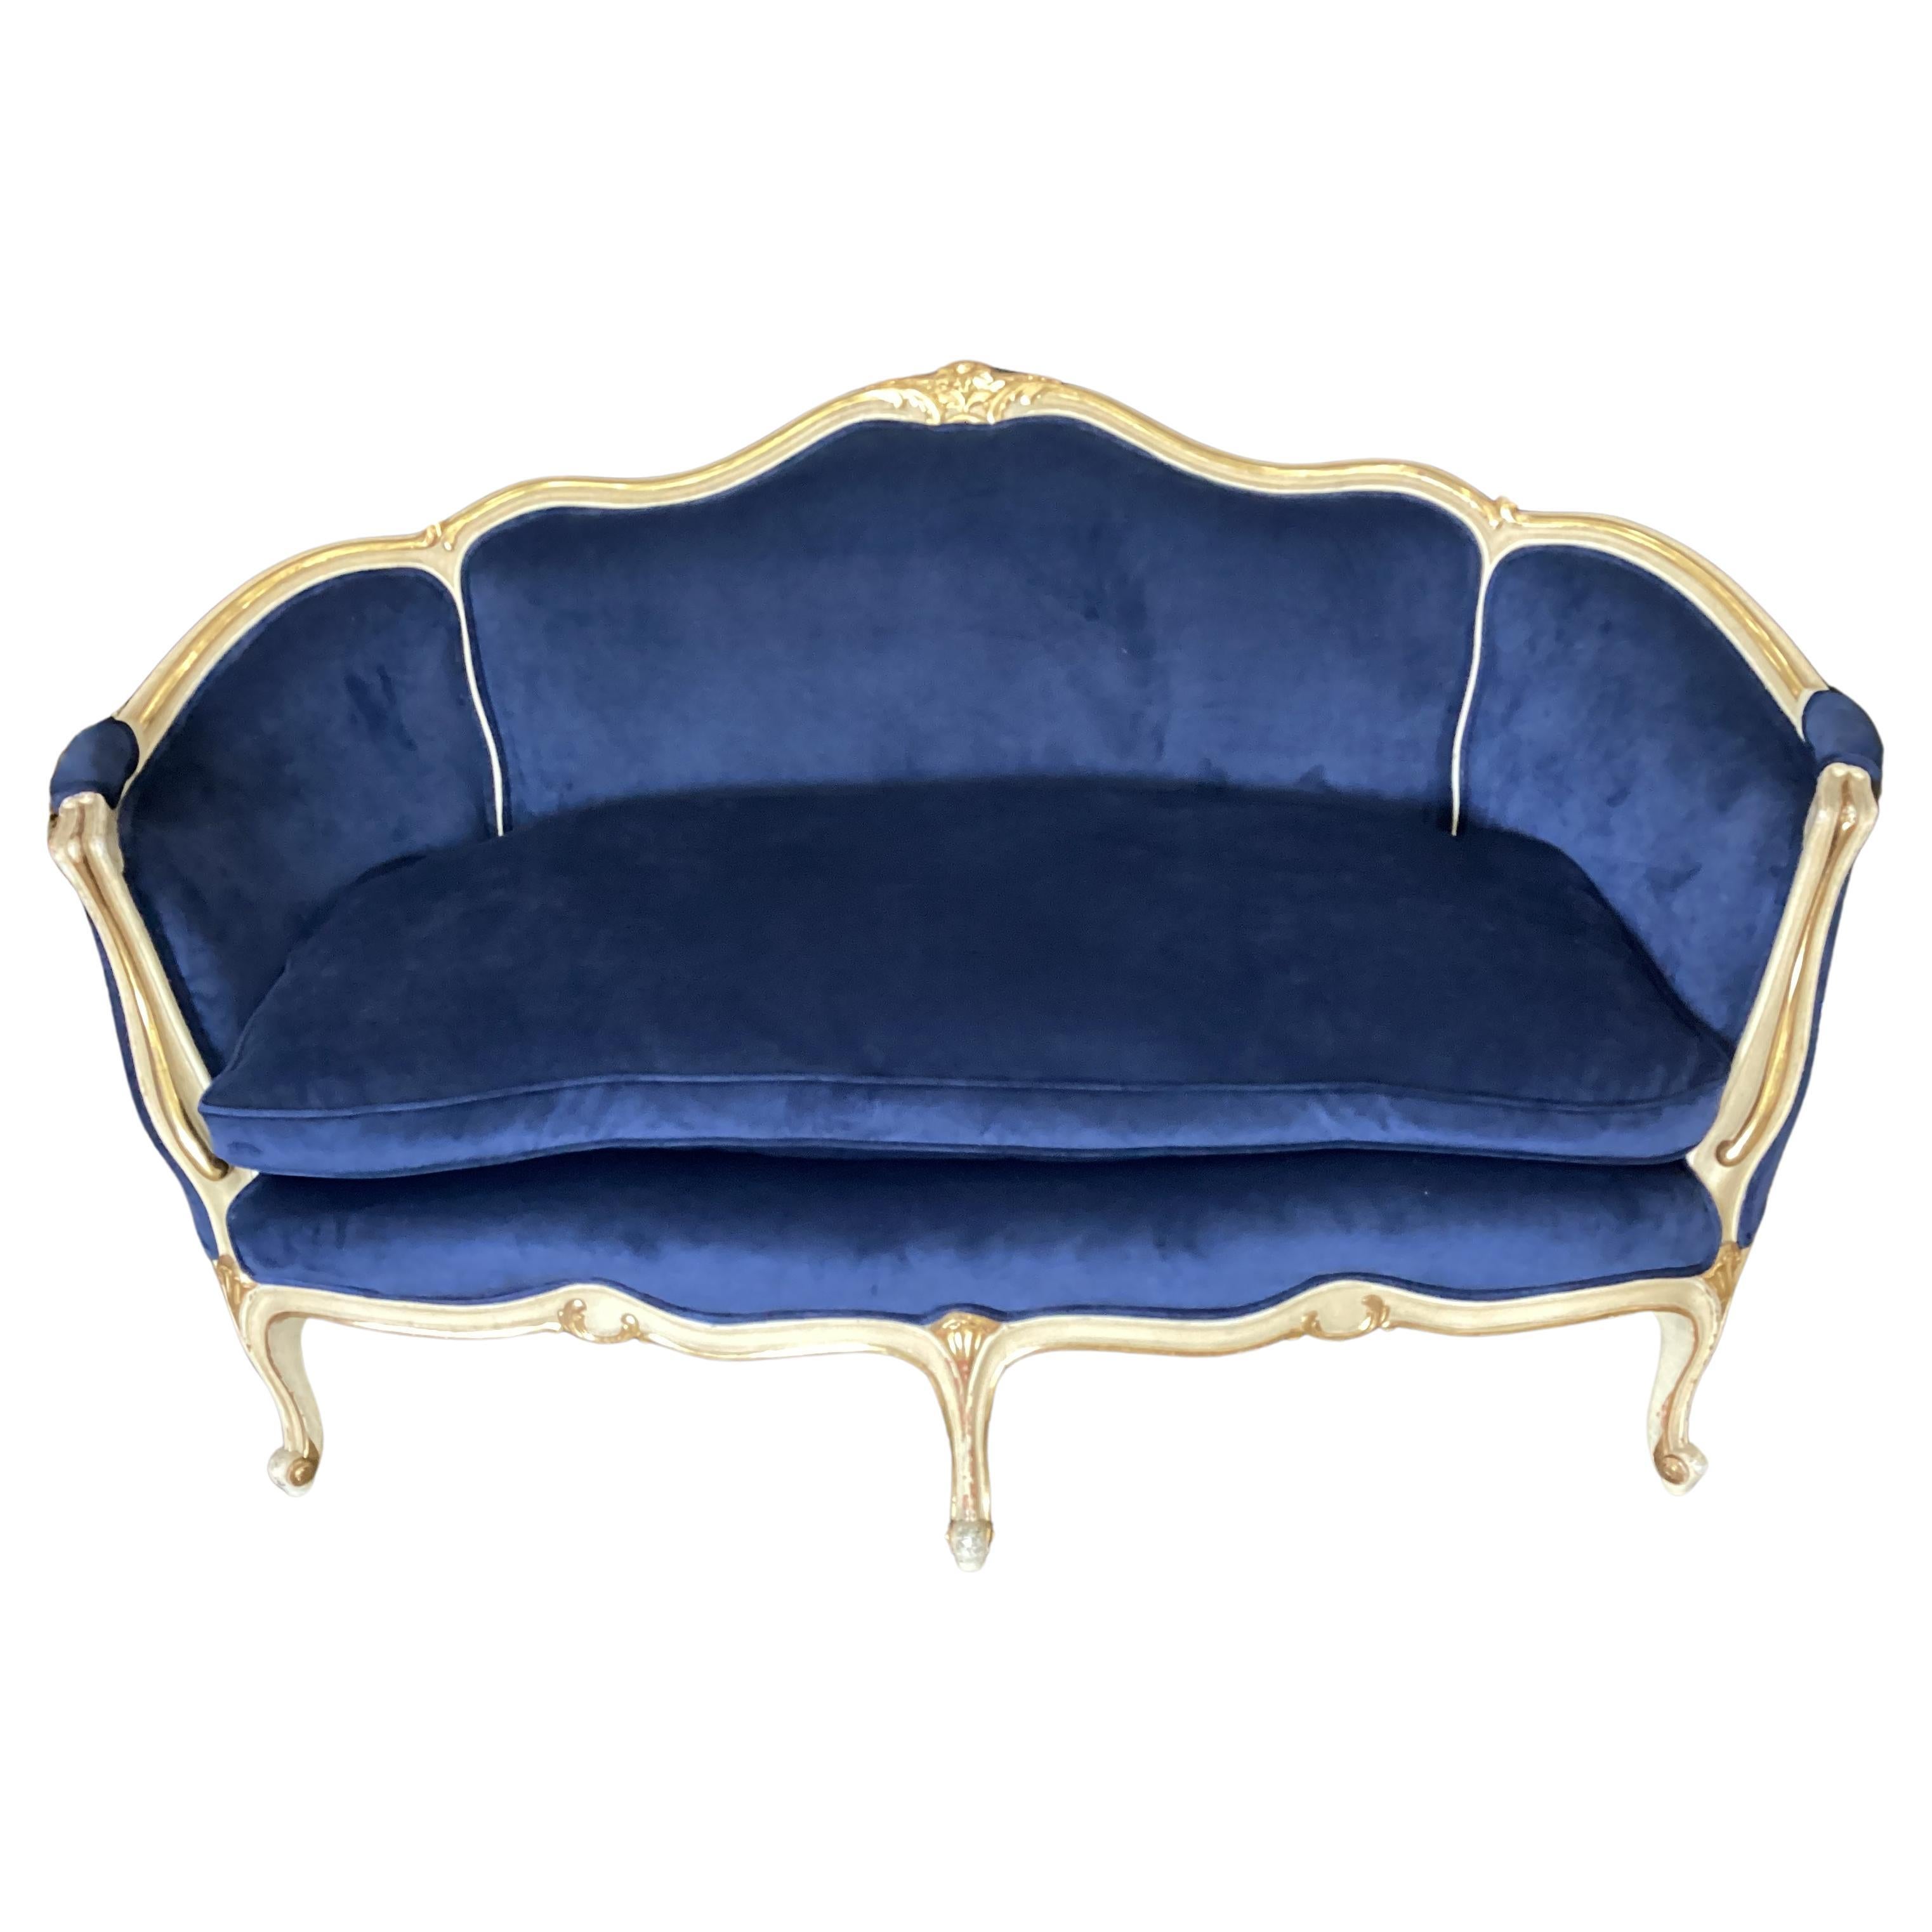 Antique Louis XV Style Painted and Gilt Settee (2 Available) For Sale